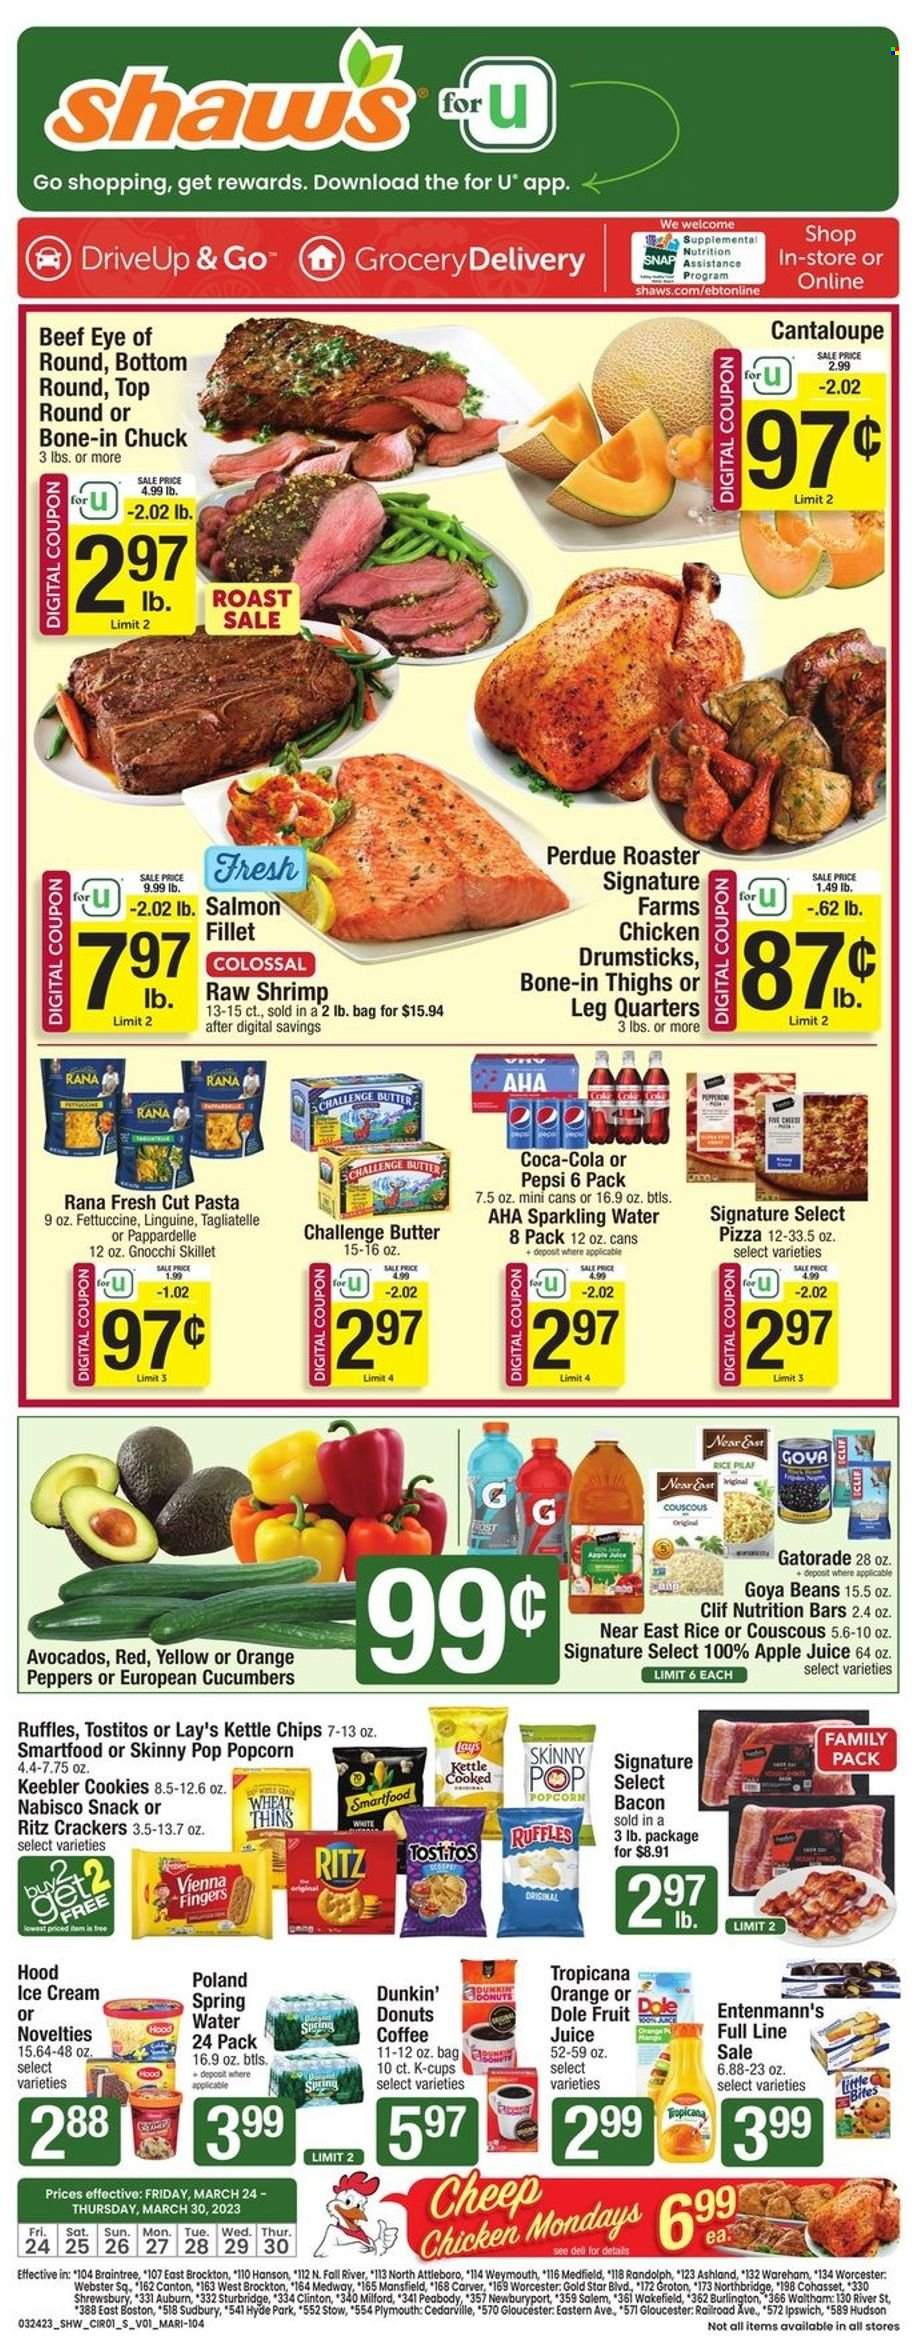 thumbnail - Shaw’s Flyer - 03/24/2023 - 03/30/2023 - Sales products - Dunkin' Donuts, Entenmann's, cantaloupe, cucumber, Dole, peppers, avocado, oranges, salmon, salmon fillet, shrimps, gnocchi, pizza, pasta, Perdue®, Rana, roast, bacon, ice cream, cookies, vienna fingers, snack, crackers, Little Bites, Keebler, RITZ, chips, Lay’s, Smartfood, Thins, popcorn, Ruffles, Tostitos, Skinny Pop, Kettle chips, Goya, nutrition bar, couscous, apple juice, Coca-Cola, Pepsi, juice, fruit juice, Gatorade, spring water, sparkling water, water, coffee, coffee capsules, K-Cups, chicken drumsticks, chicken, beef meat, eye of round. Page 1.